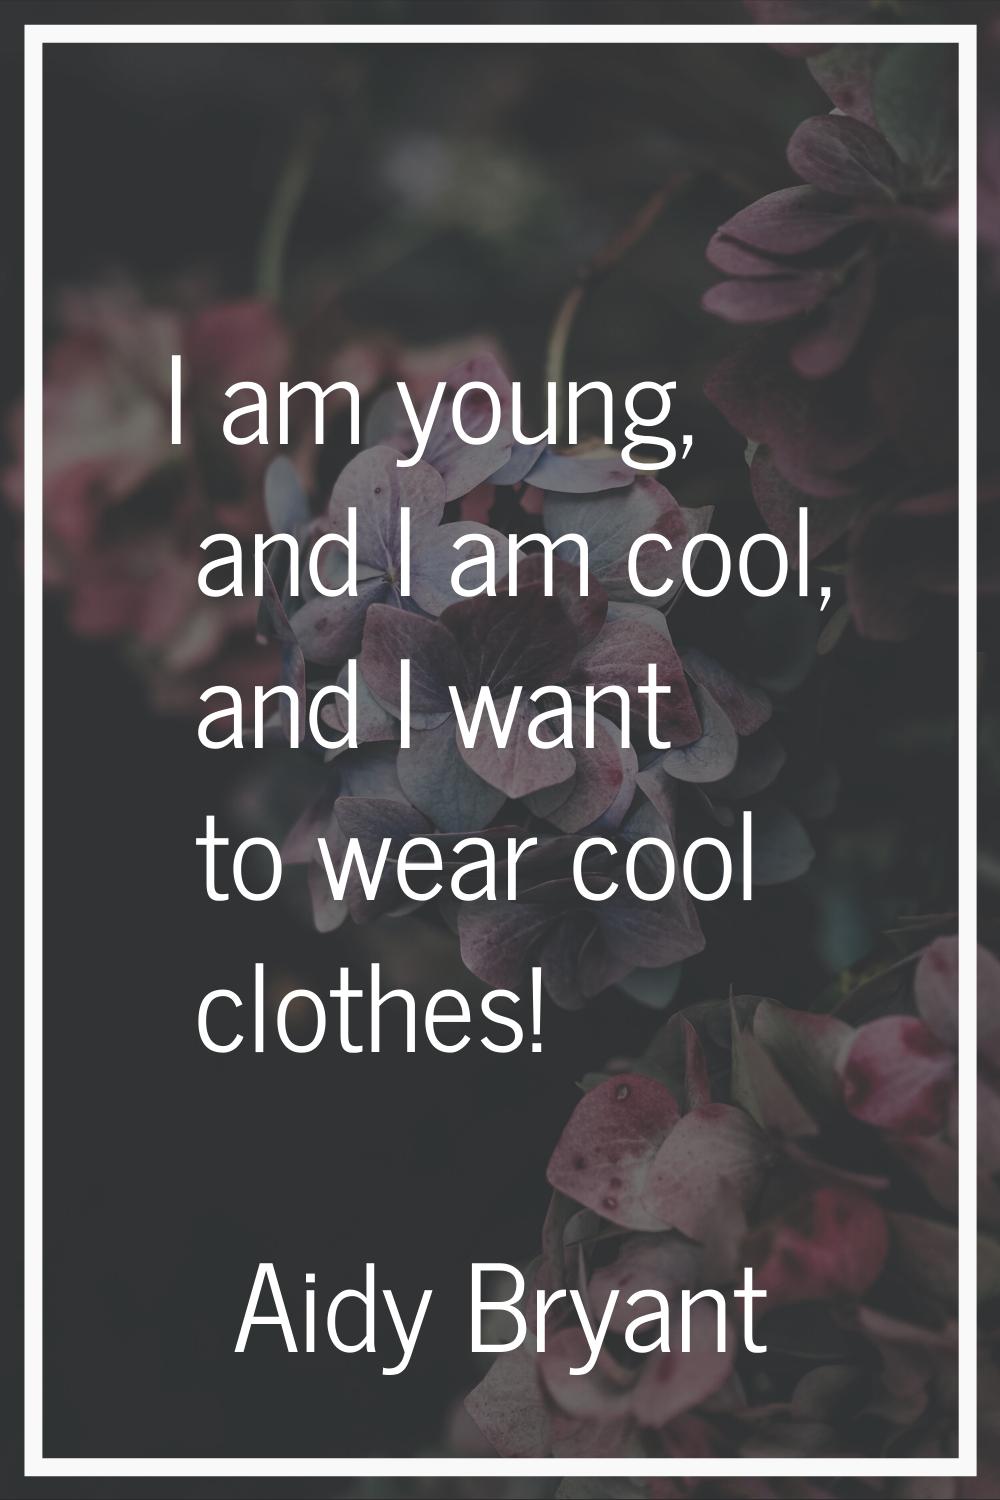 I am young, and I am cool, and I want to wear cool clothes!